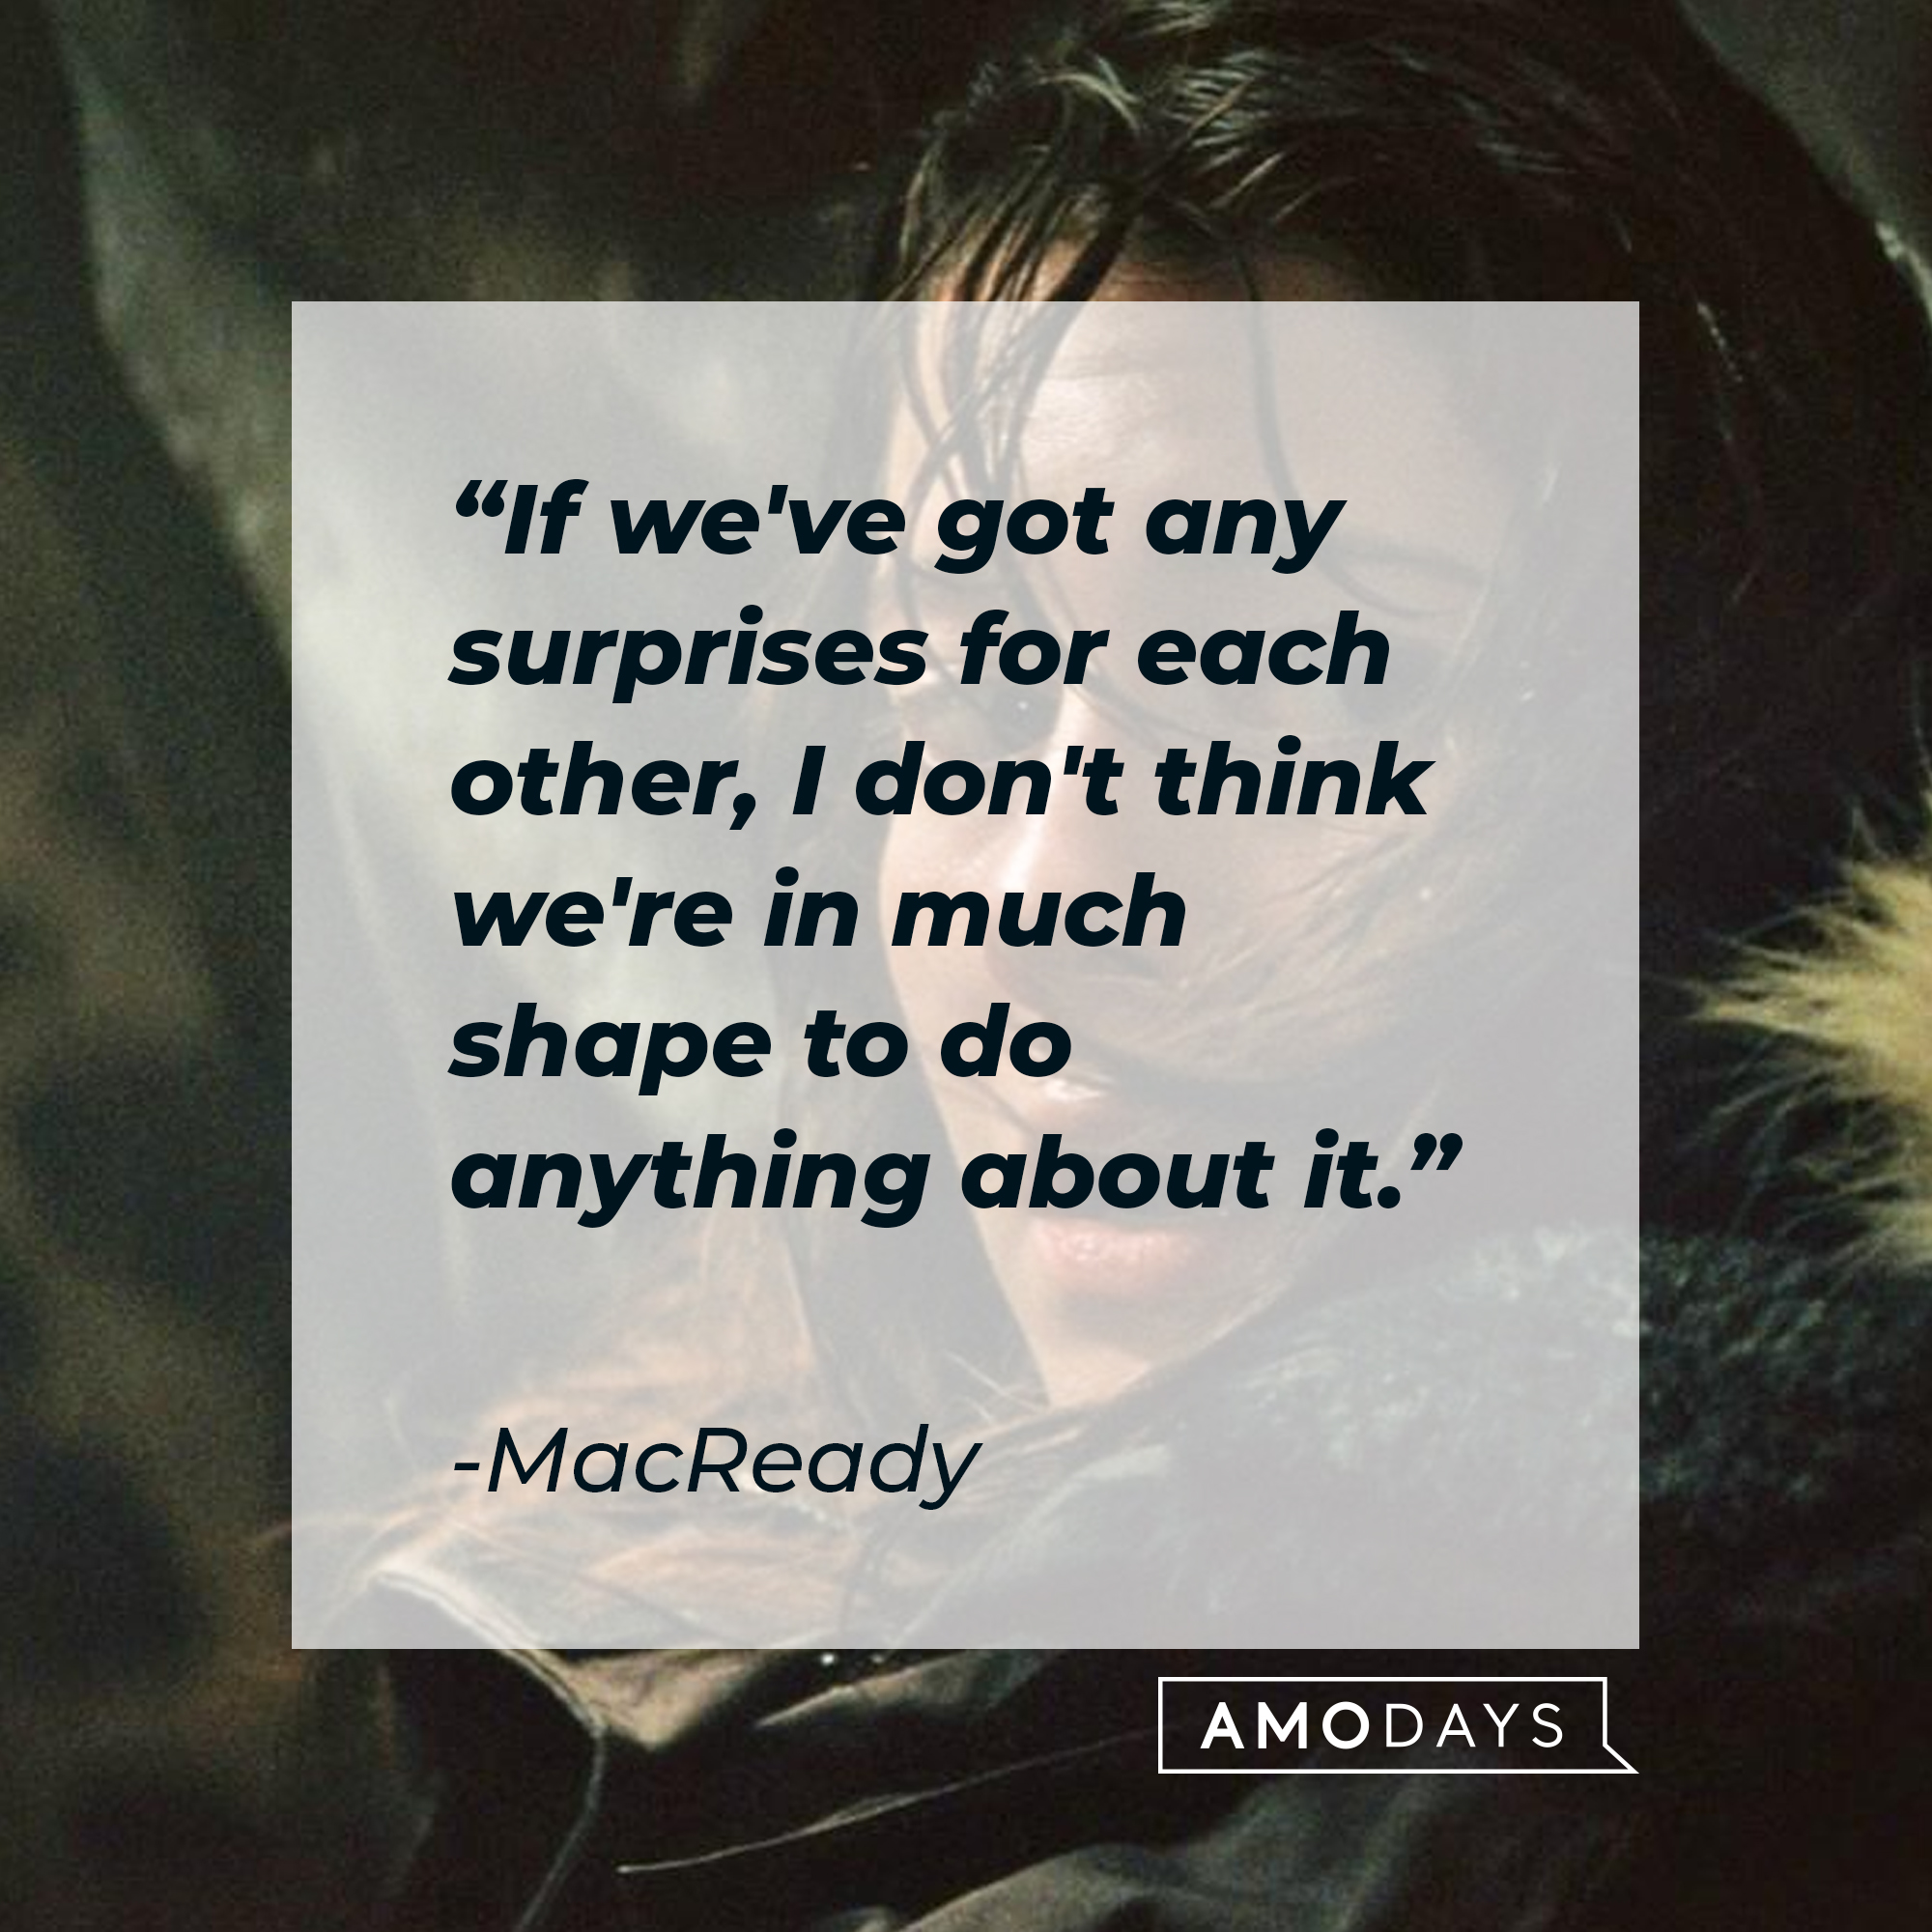 MacReady's quote: "If we've got any surprises for each other, I don't think we're in much shape to do anything about it." | Source: facebook.com/thethingmovie